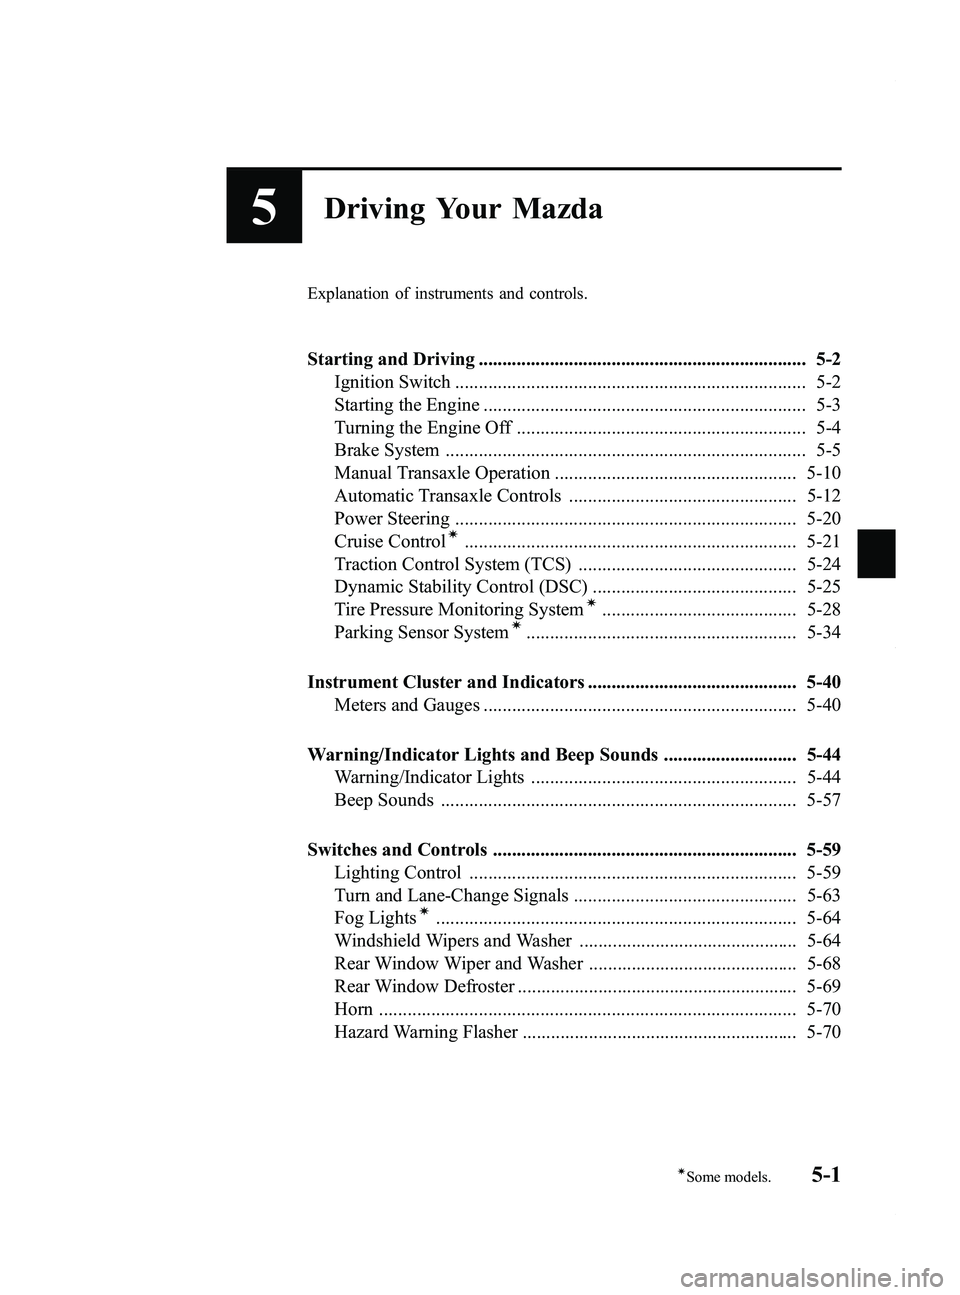 MAZDA MODEL 5 2014  Owners Manual Black plate (125,1)
5Driving Your Mazda
Explanation of instruments and controls.
Starting and Driving ..................................................................... 5-2Ignition Switch .........